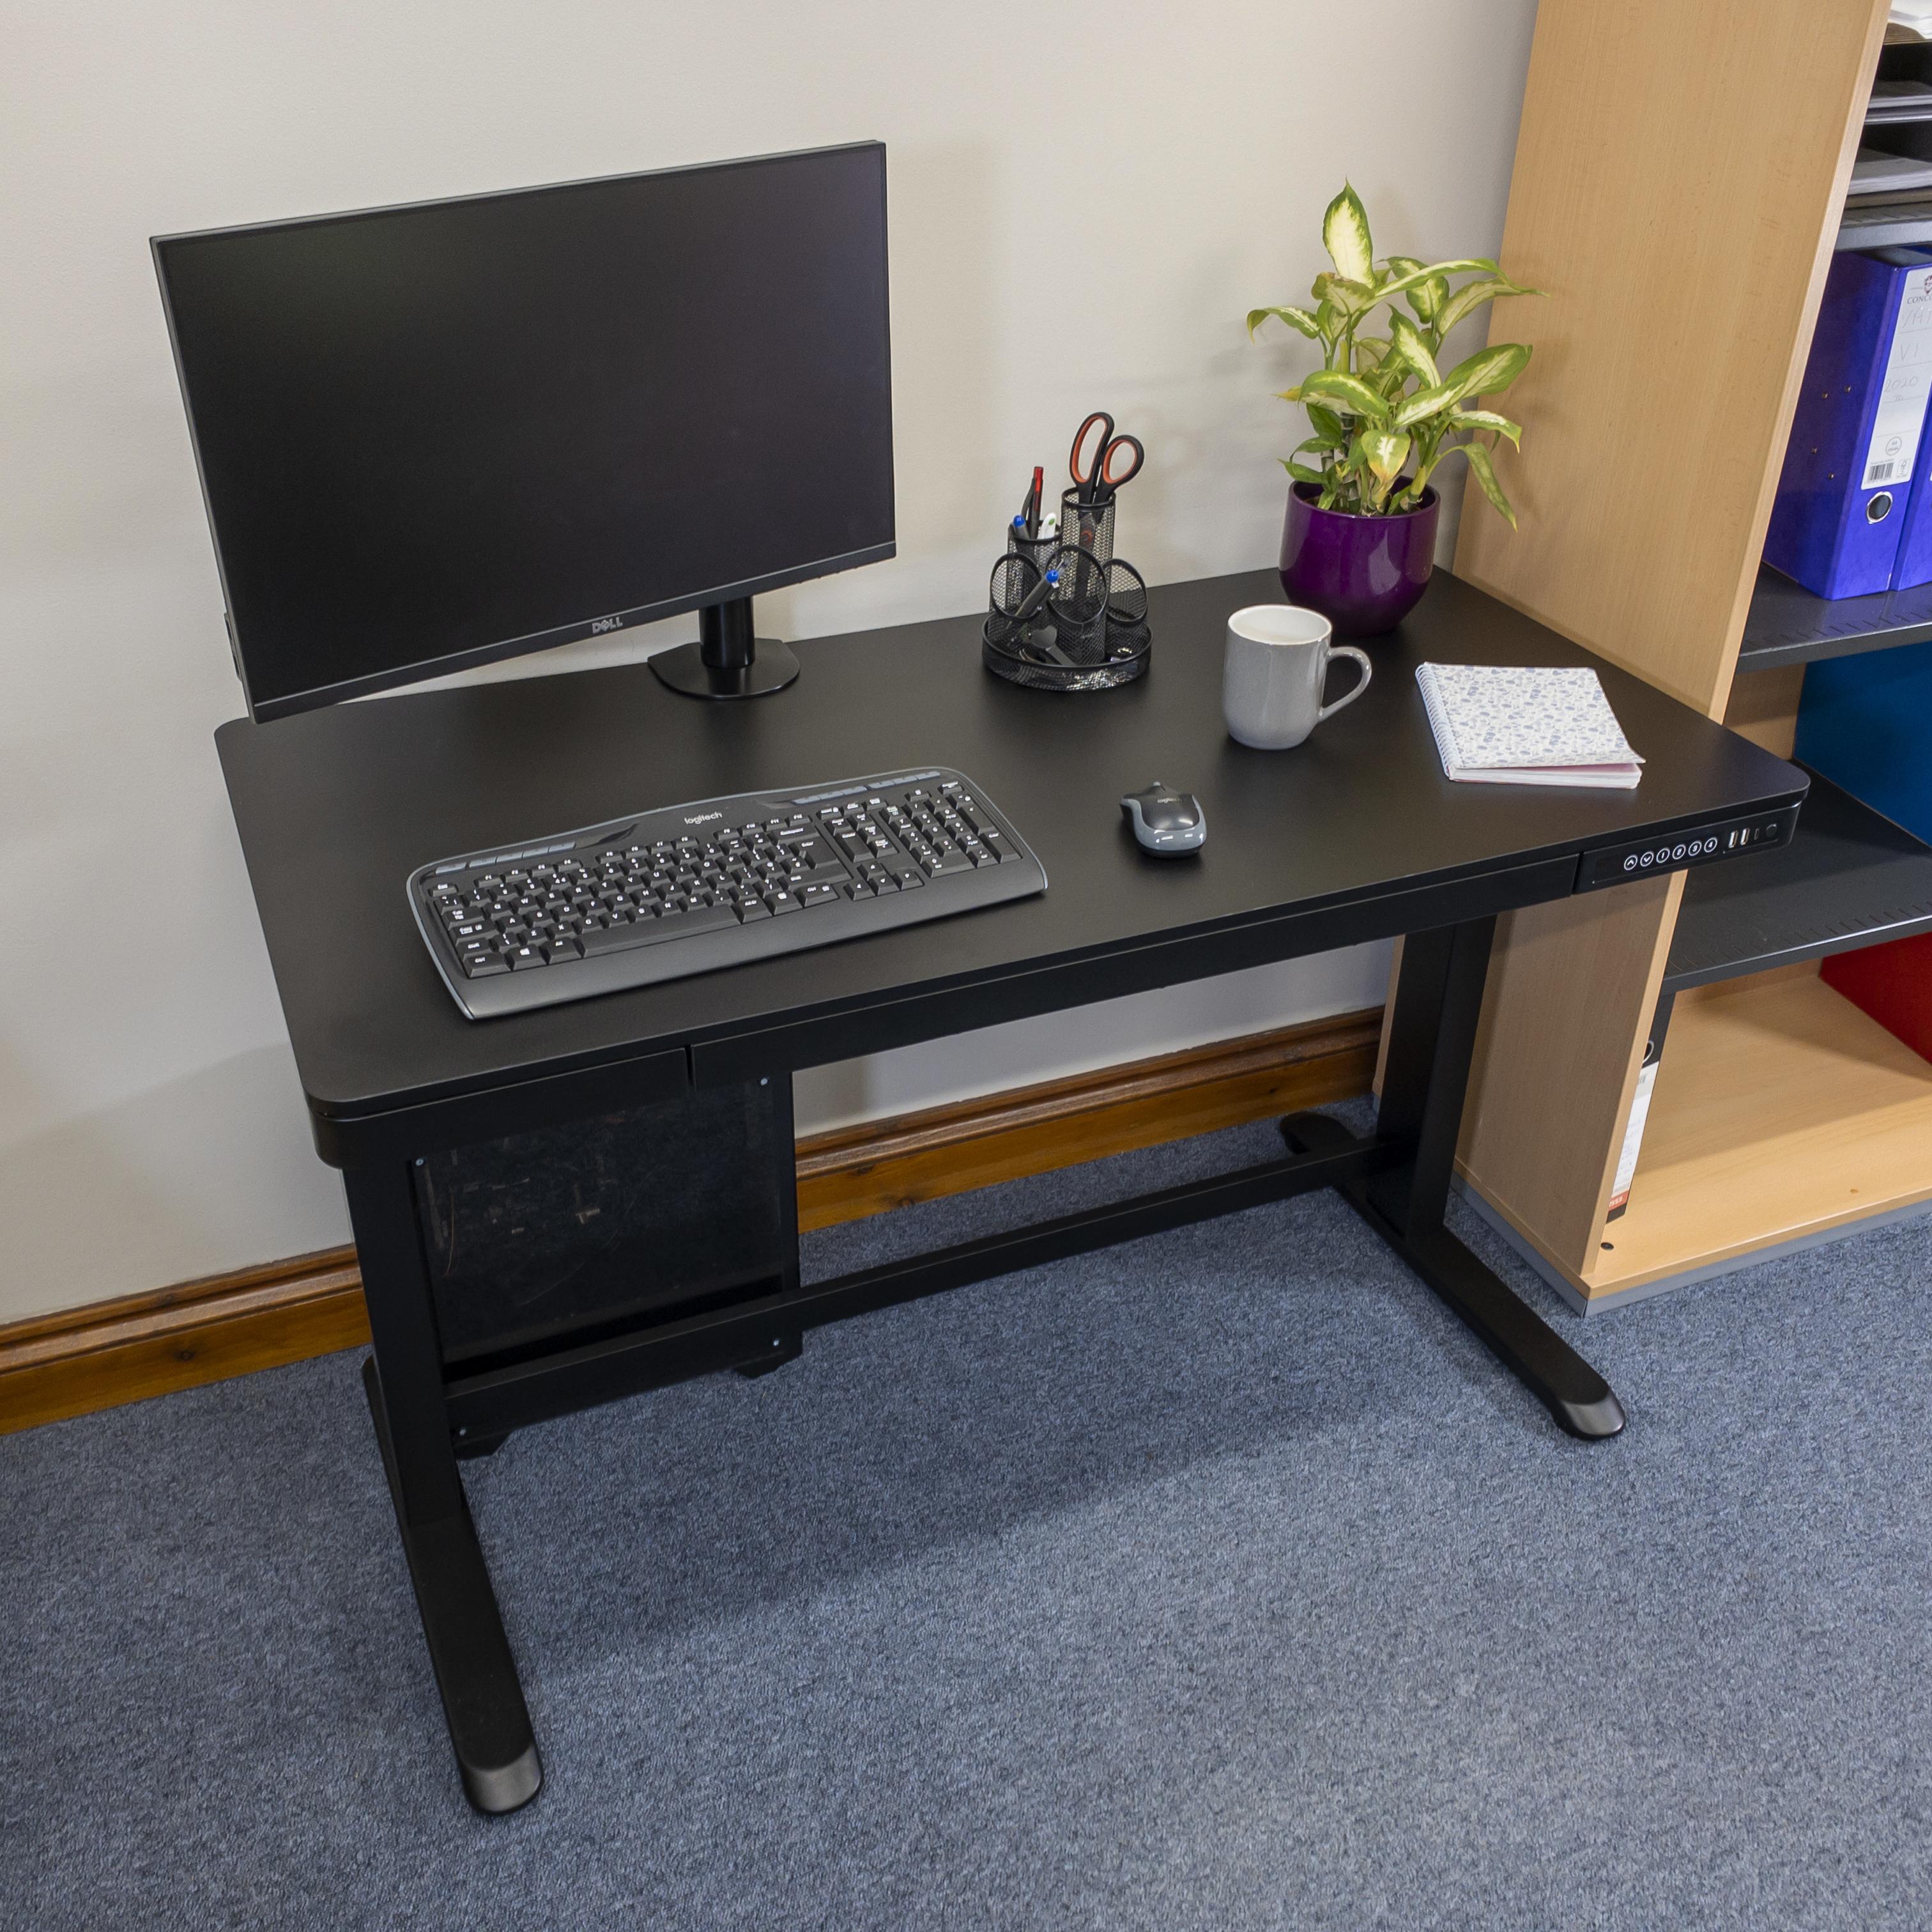 Elevate 120 sit stand desk in black with a monitor and VTArm, Bluetooth keyboard and mouse.